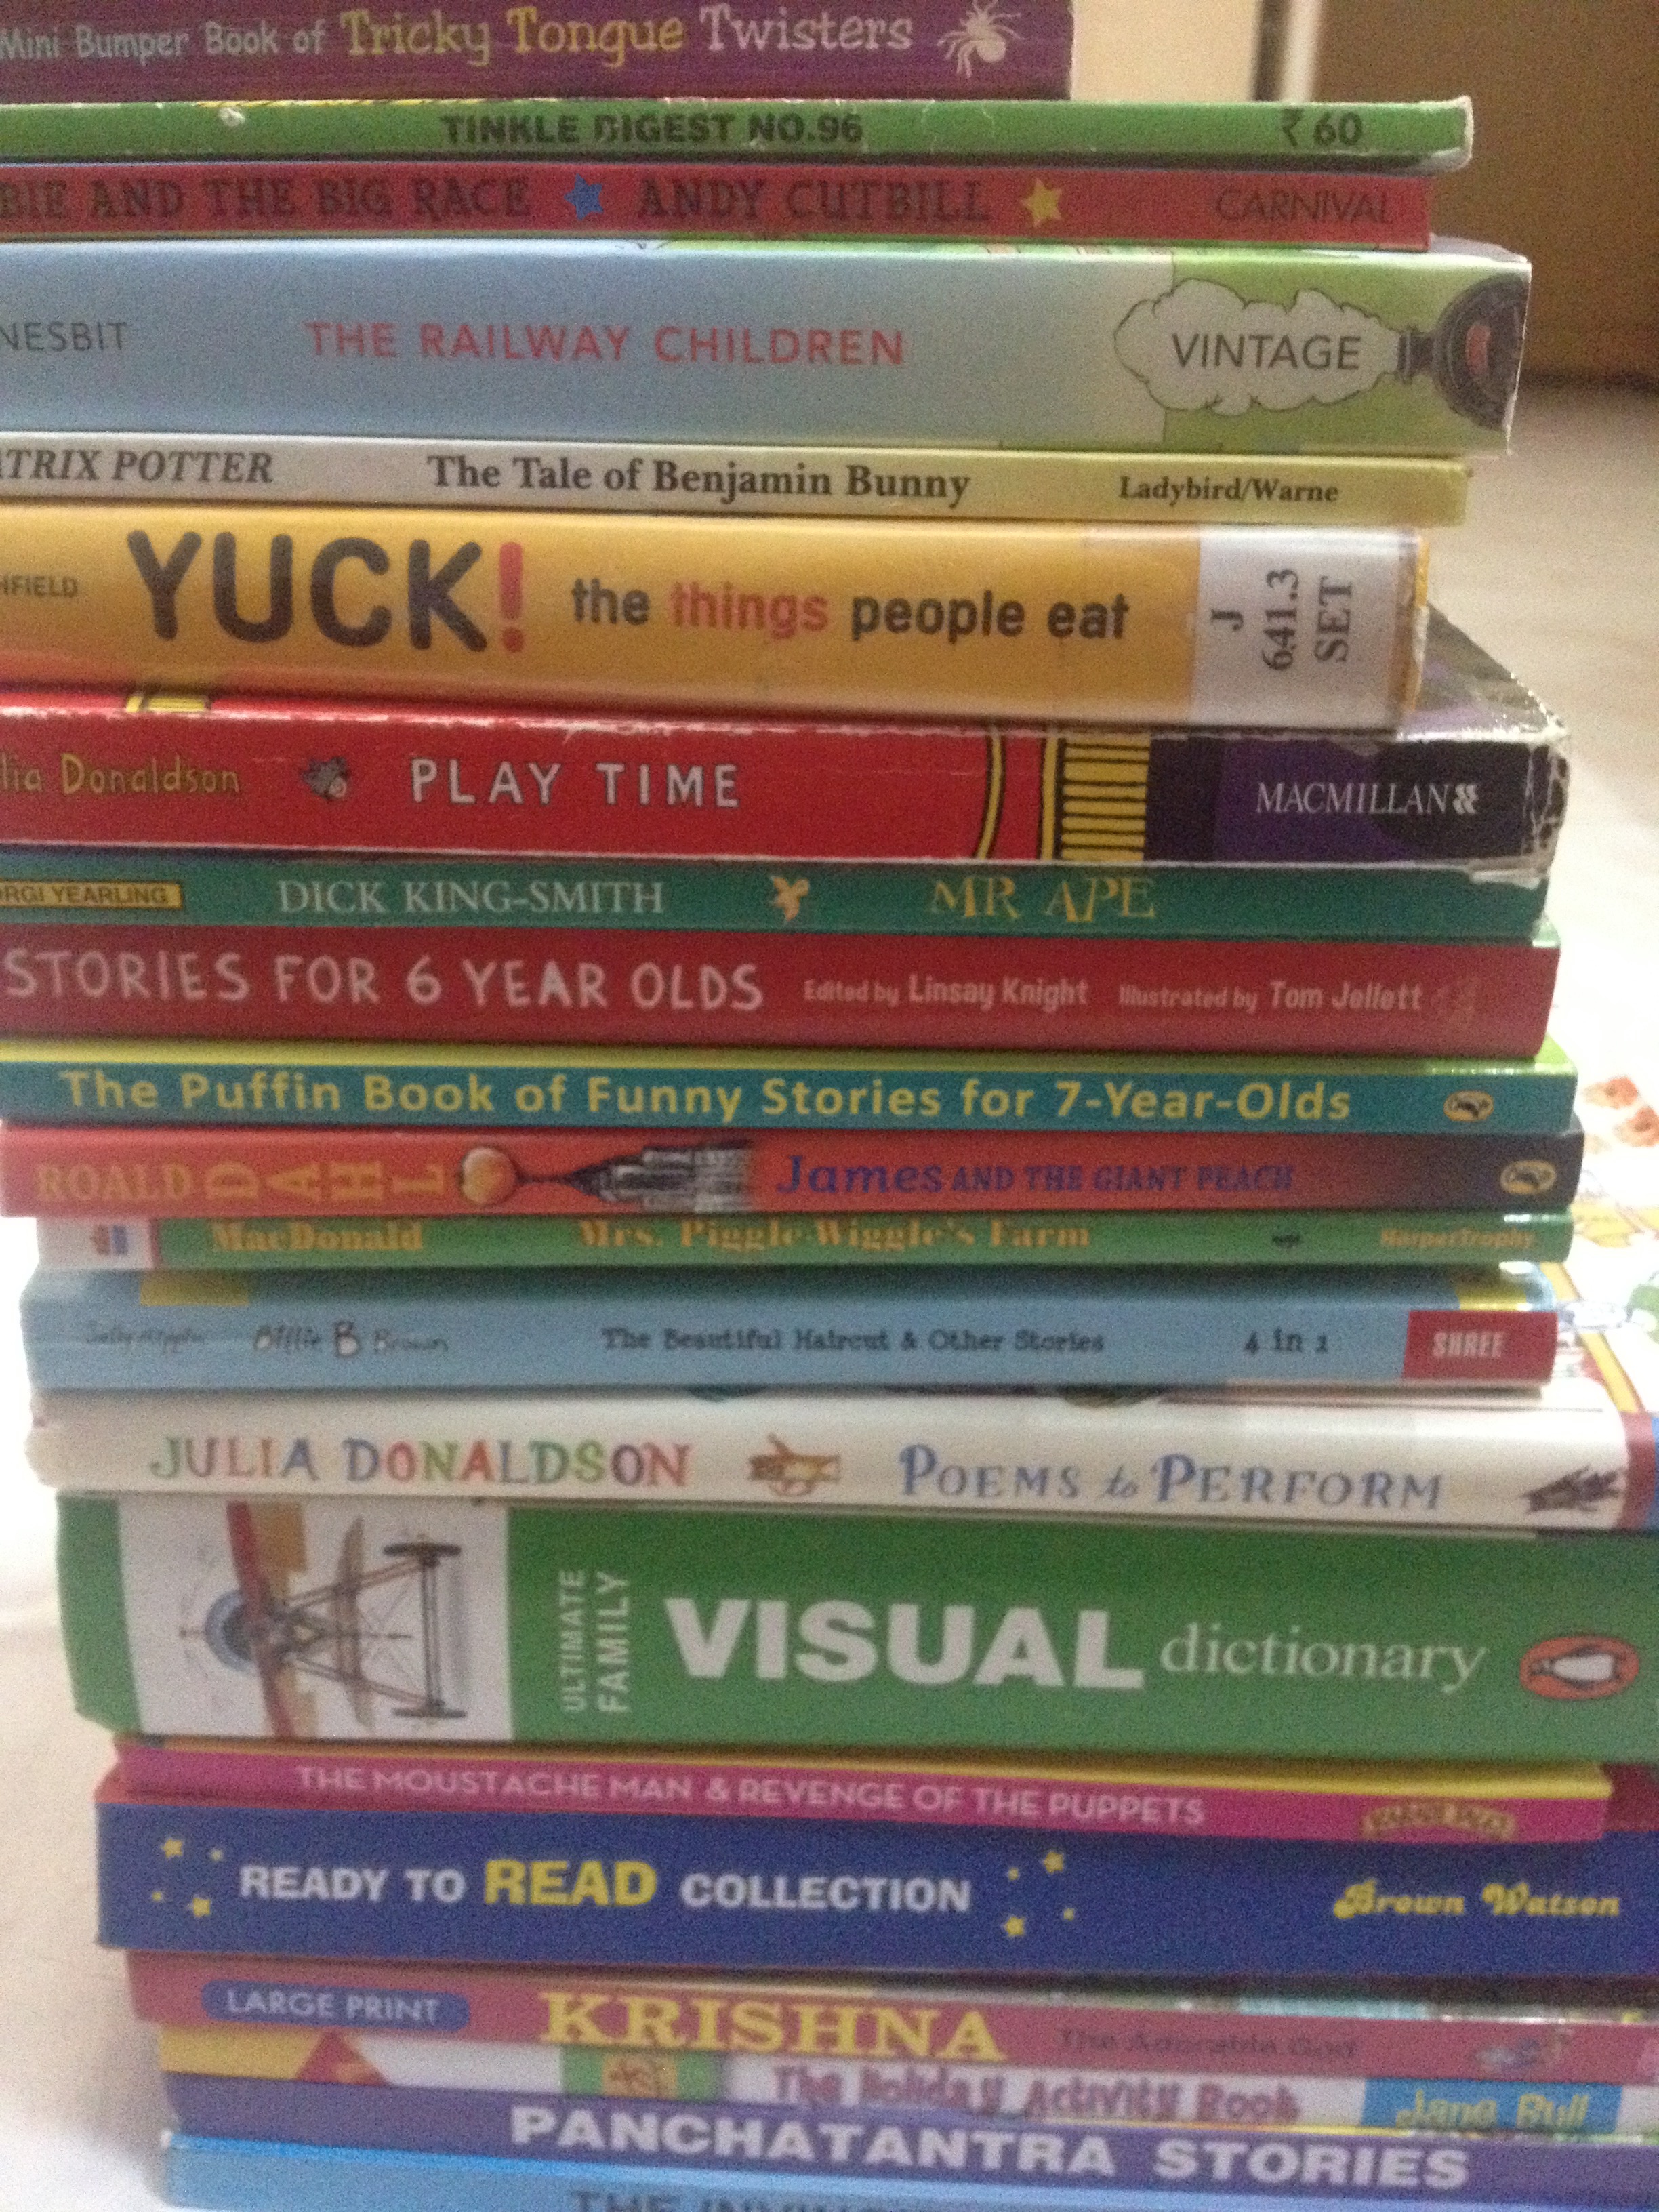 Some of kuttyma's books